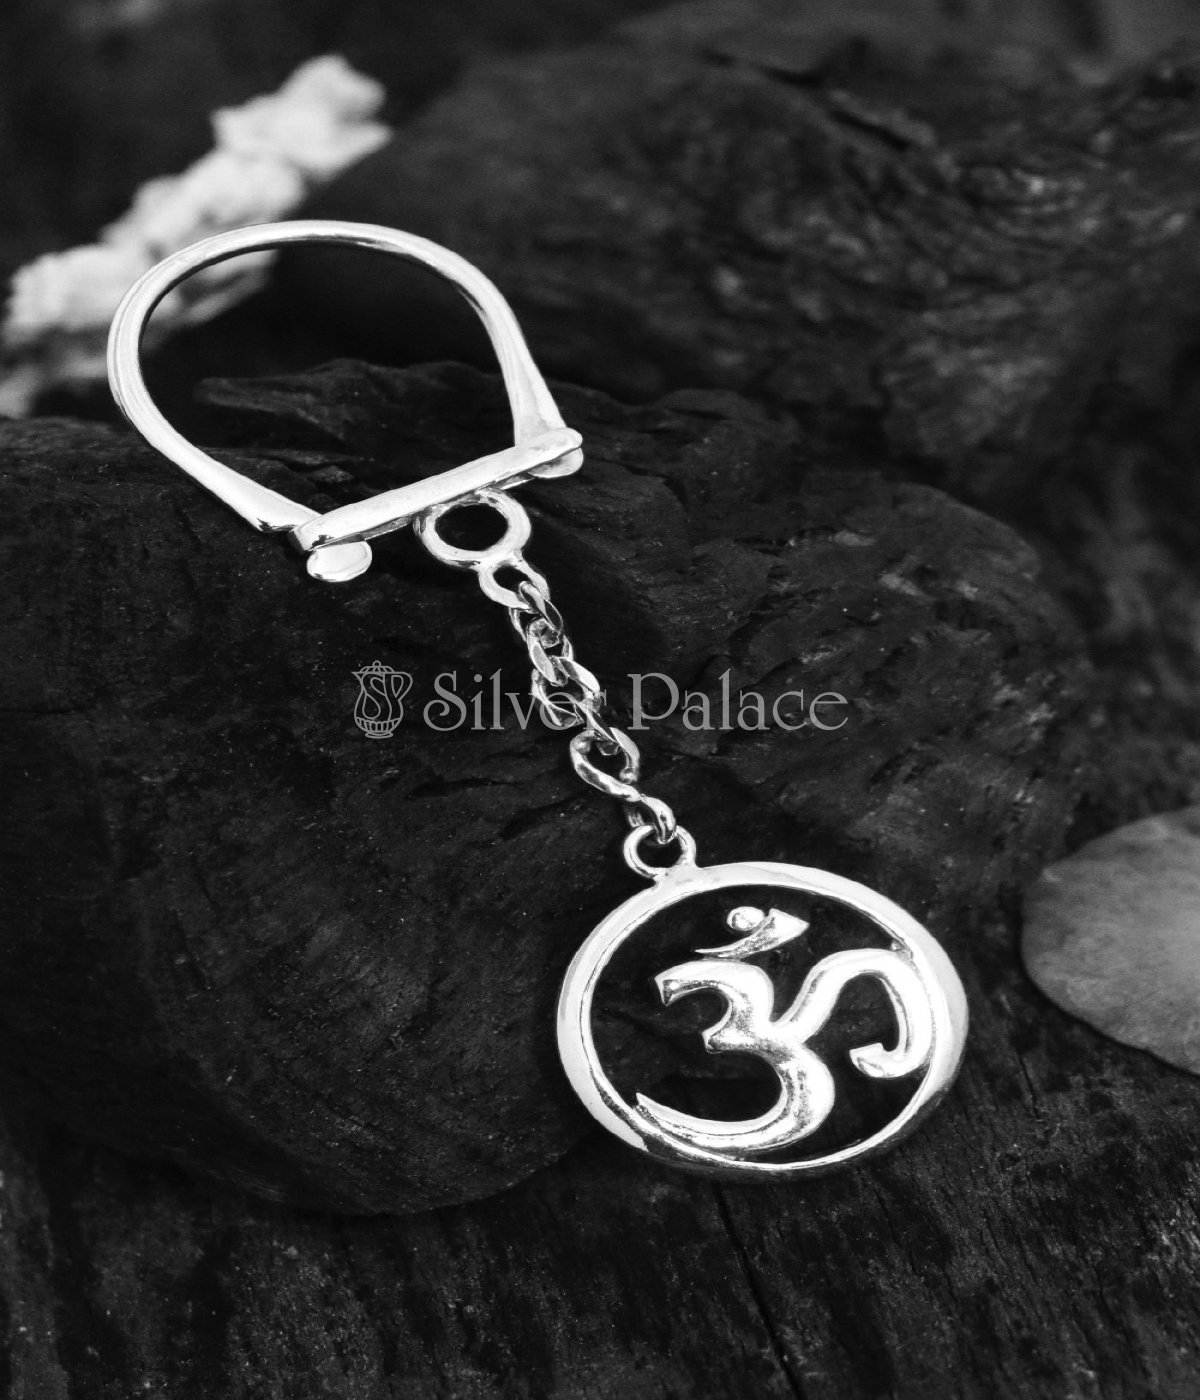 Silver Om Design Keychain - Silver Palace